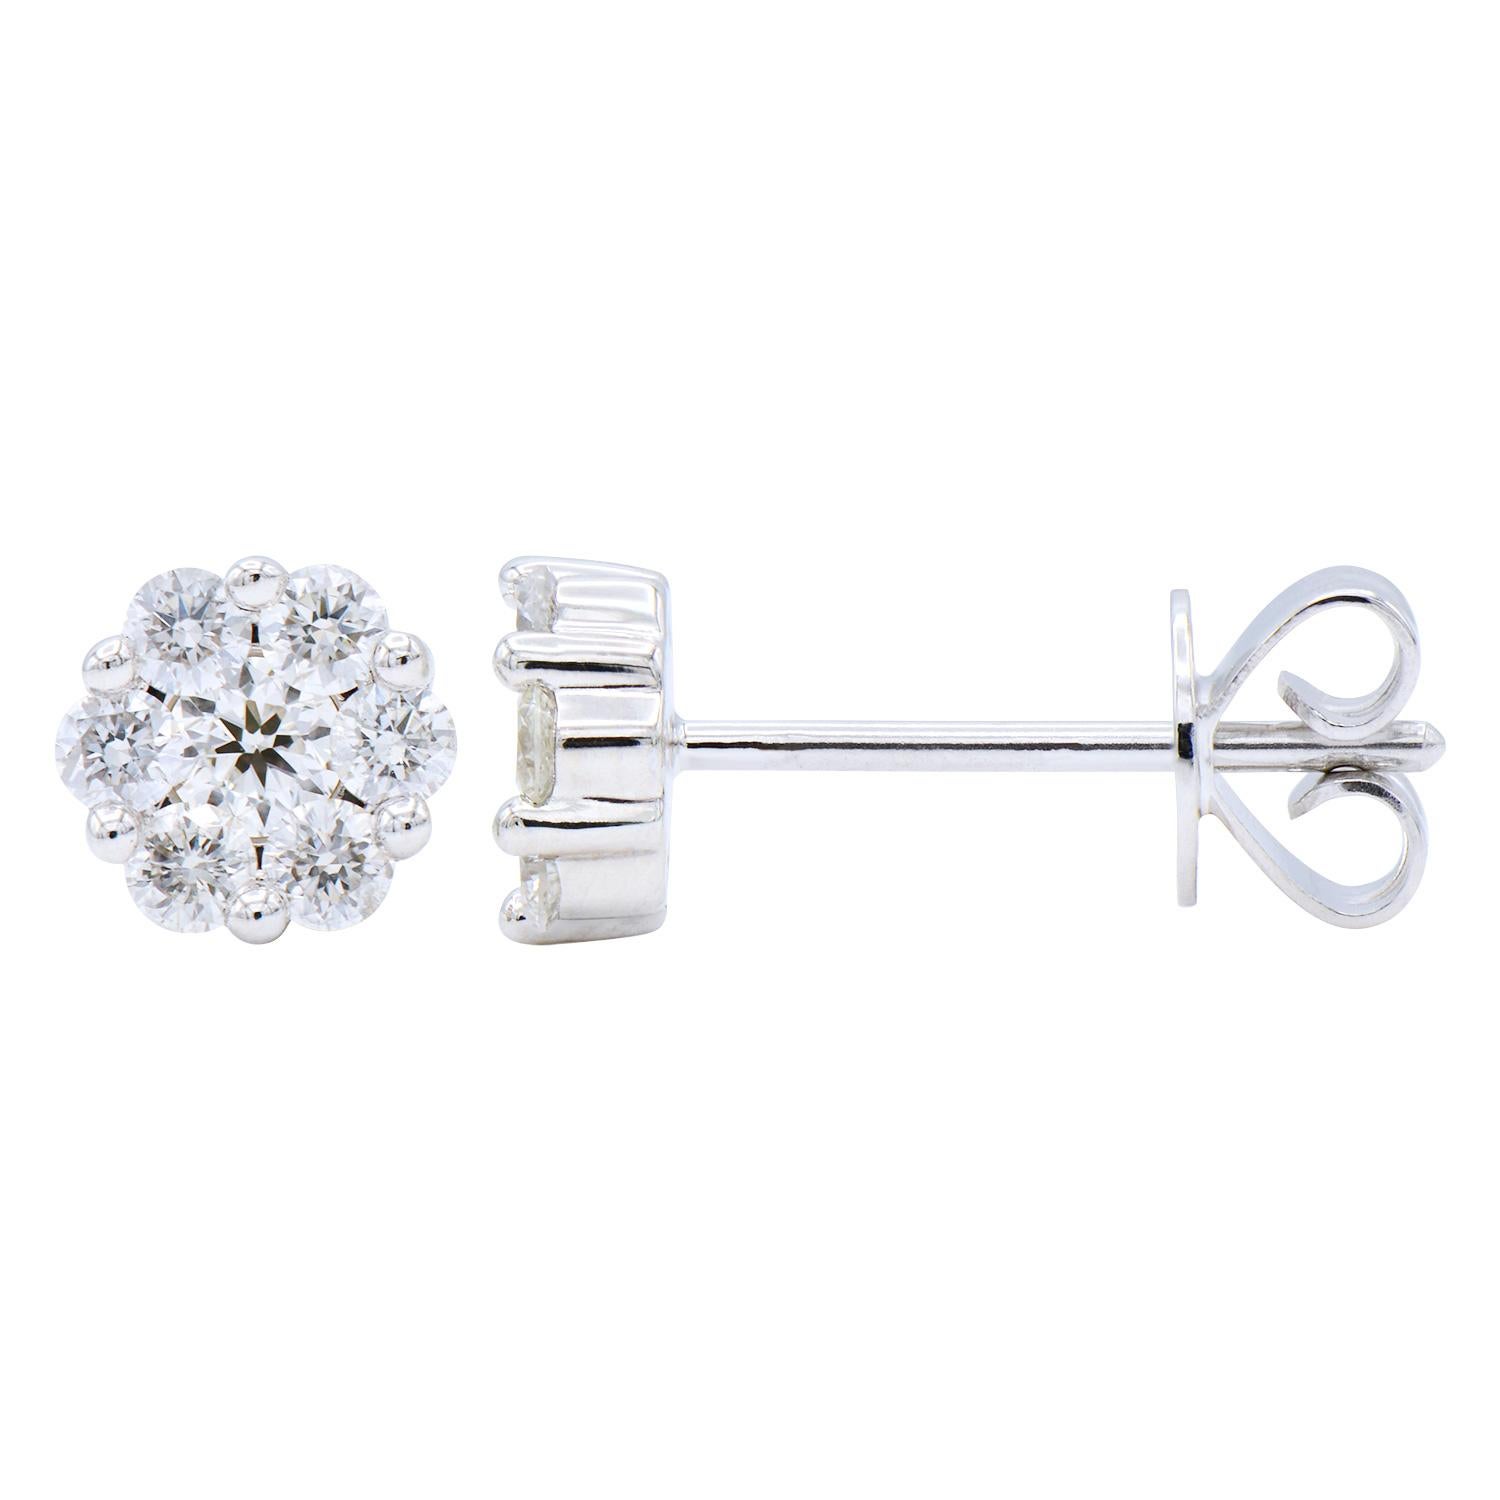 These stunning stud earrings are made with 1.1 grams of 14 karat white gold and contain 14 round diamonds. The diamonds are VS2, G color, and have a total carat weight of .41 ct. These are stud earrings that have a push back with an extra notch for